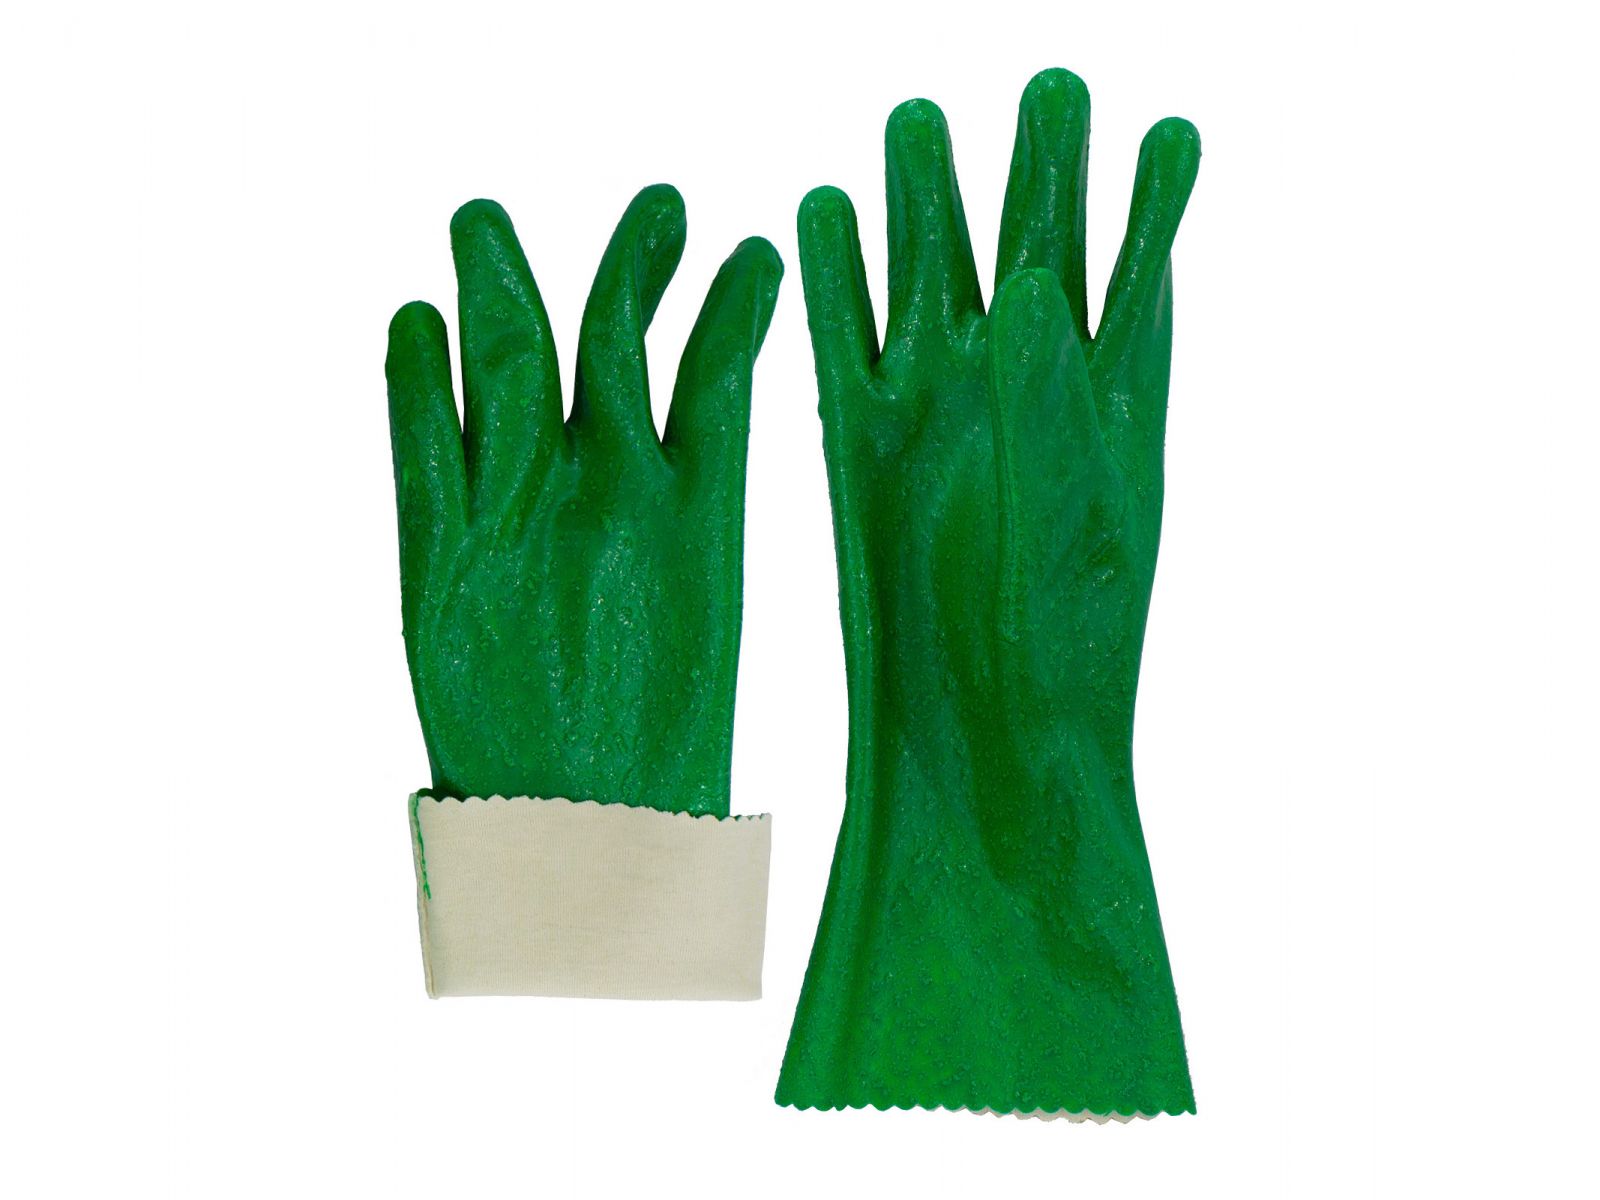 Fabric gloves are 100% cotton covered with NBR rubber